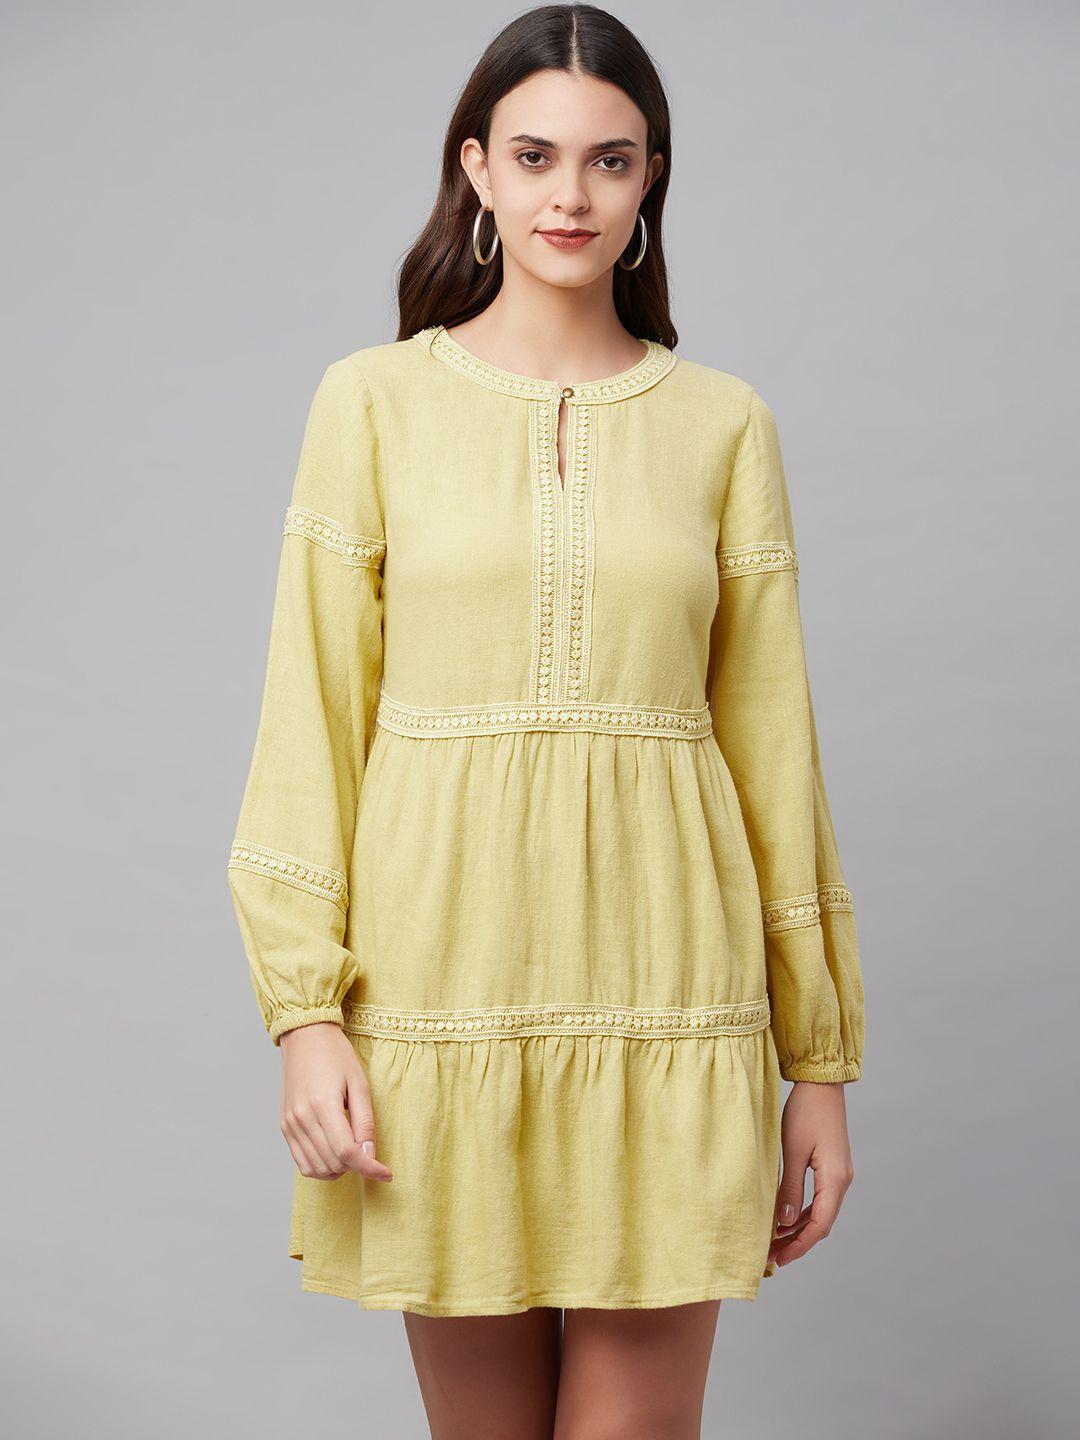 marks & spencer women yellow solid lace inserts a-line mini dress